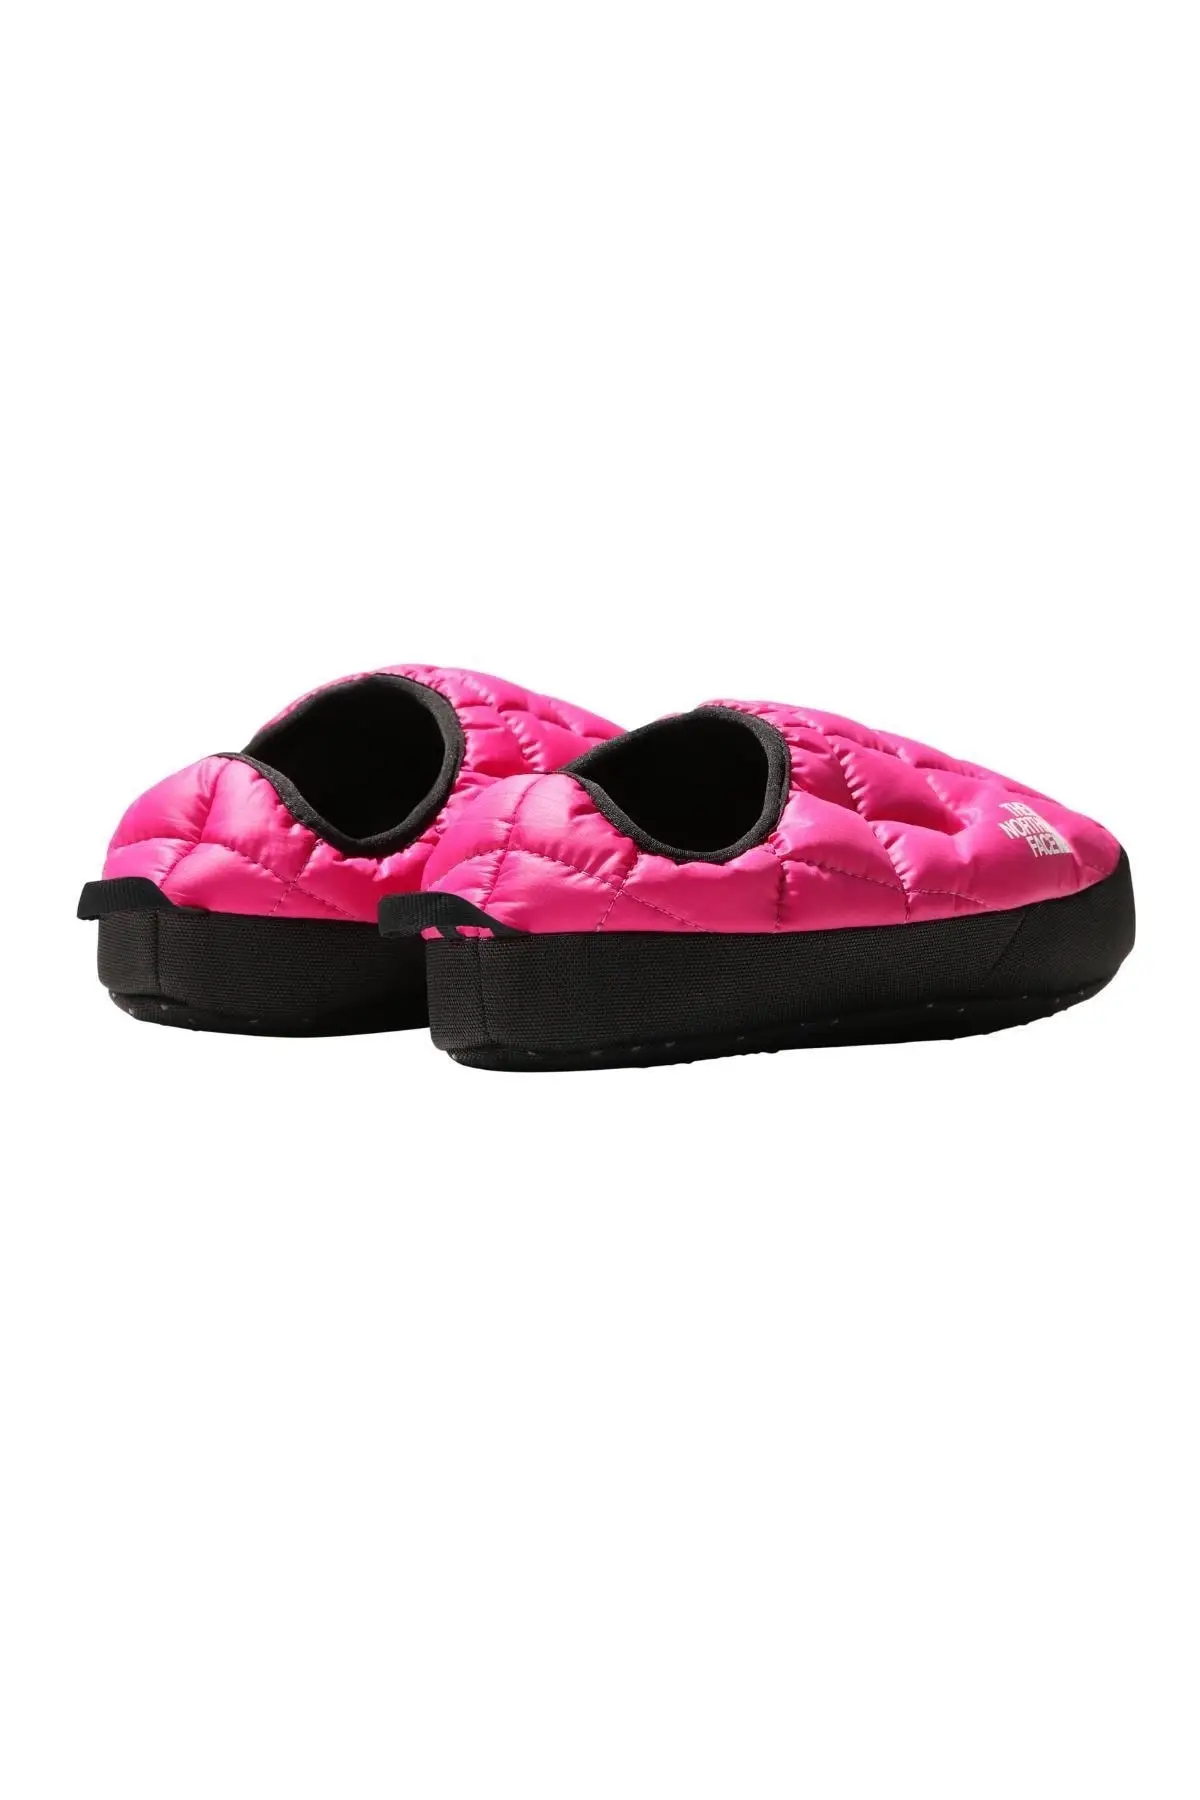 north face slippers